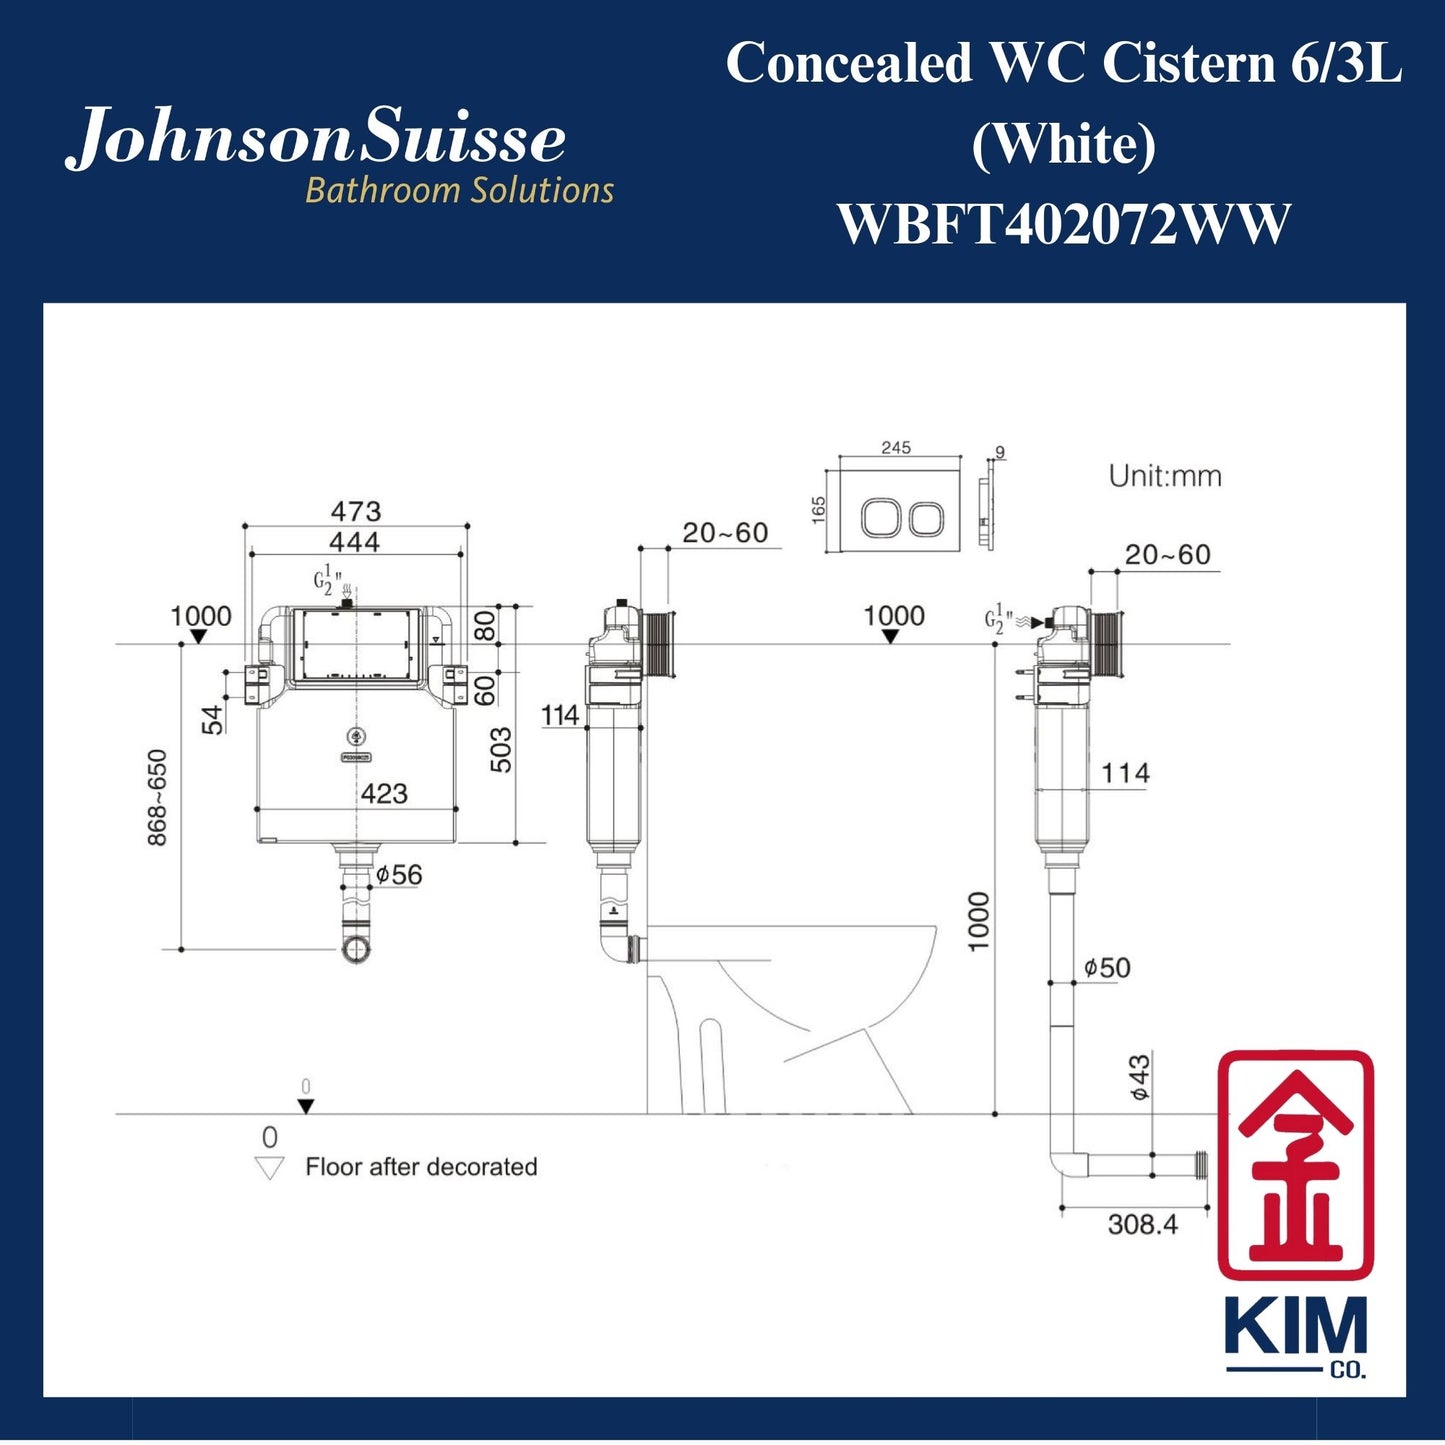 Johnson Suisse 6/3L  Concealed Cistern (White) (WBFT402072WW)